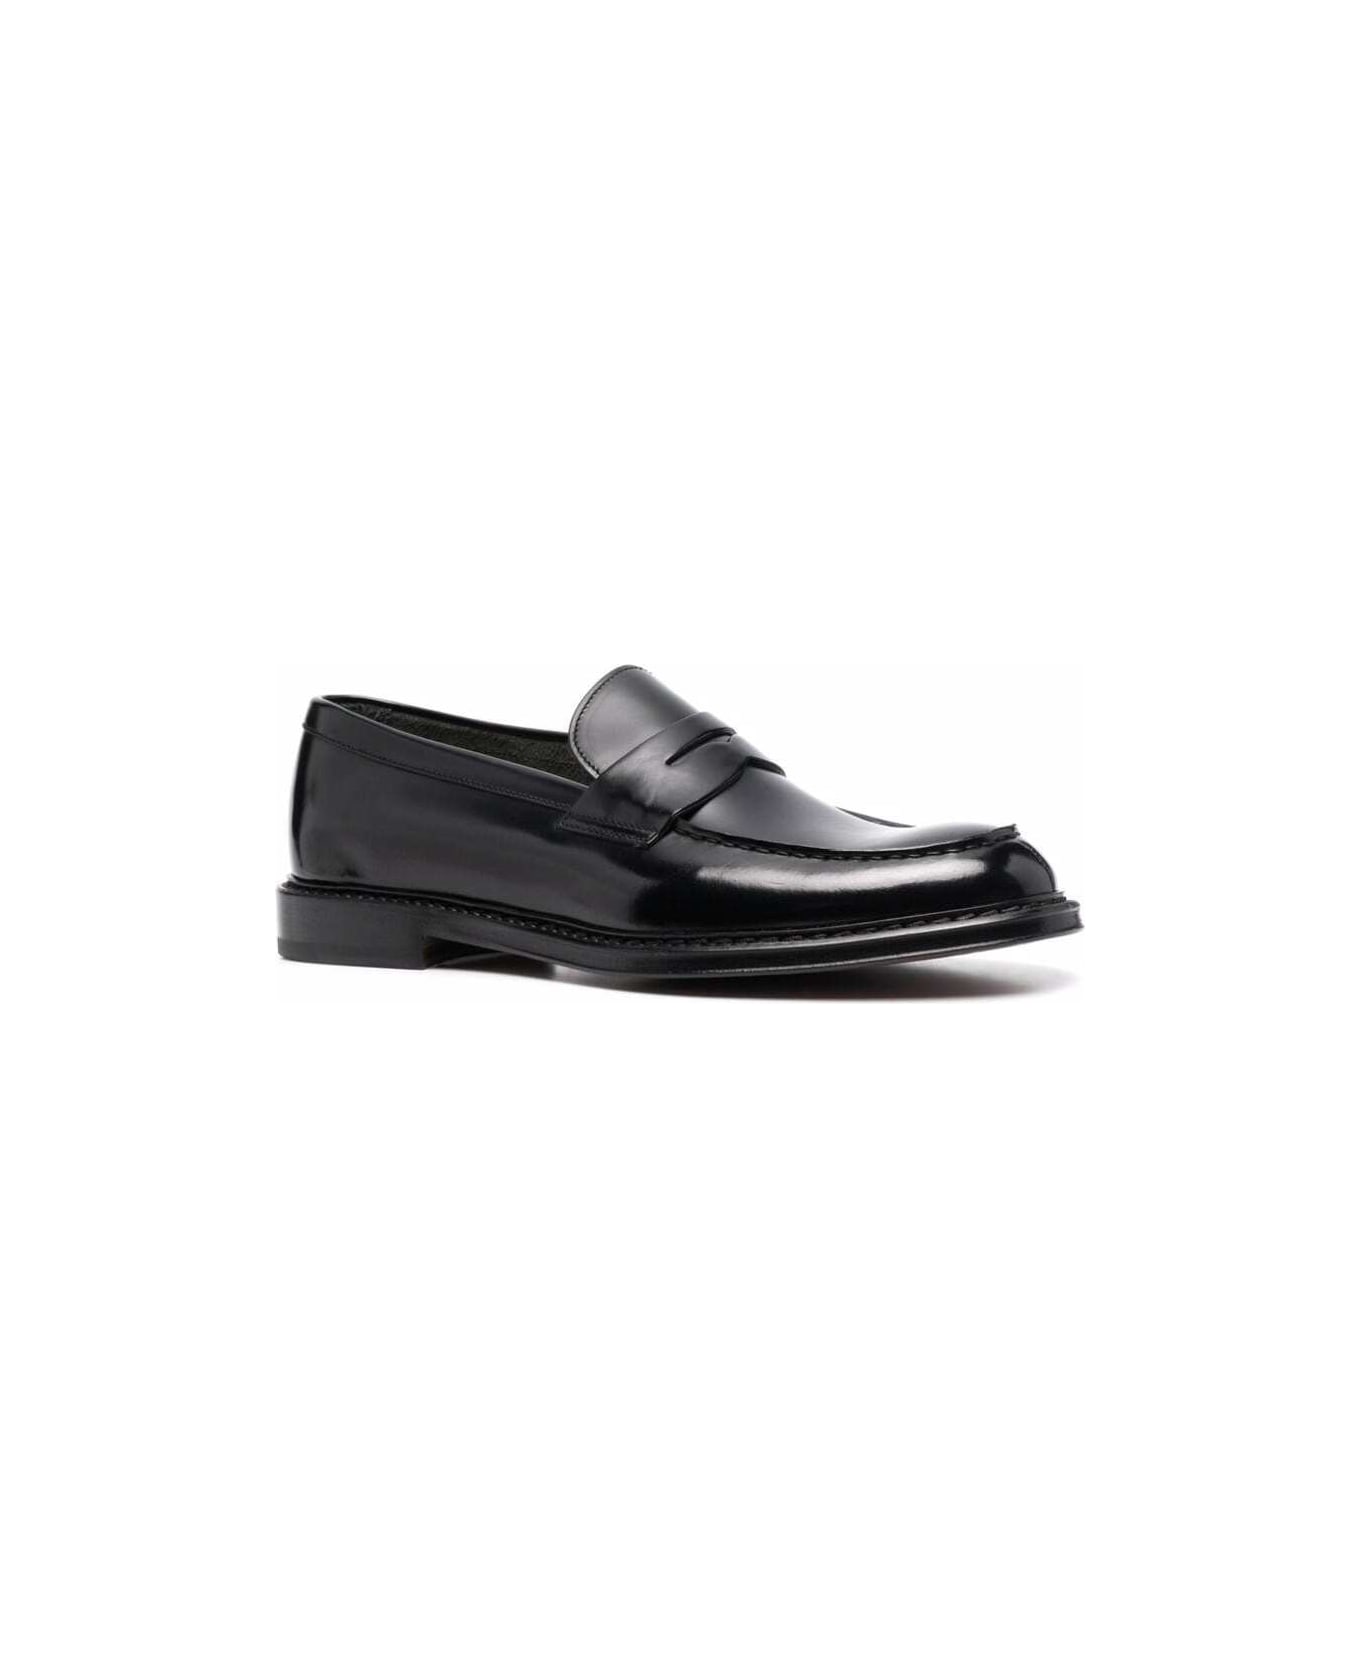 Doucal's Black Slip-on Loafers With Round Toe In Patent Leather Man - Black ローファー＆デッキシューズ